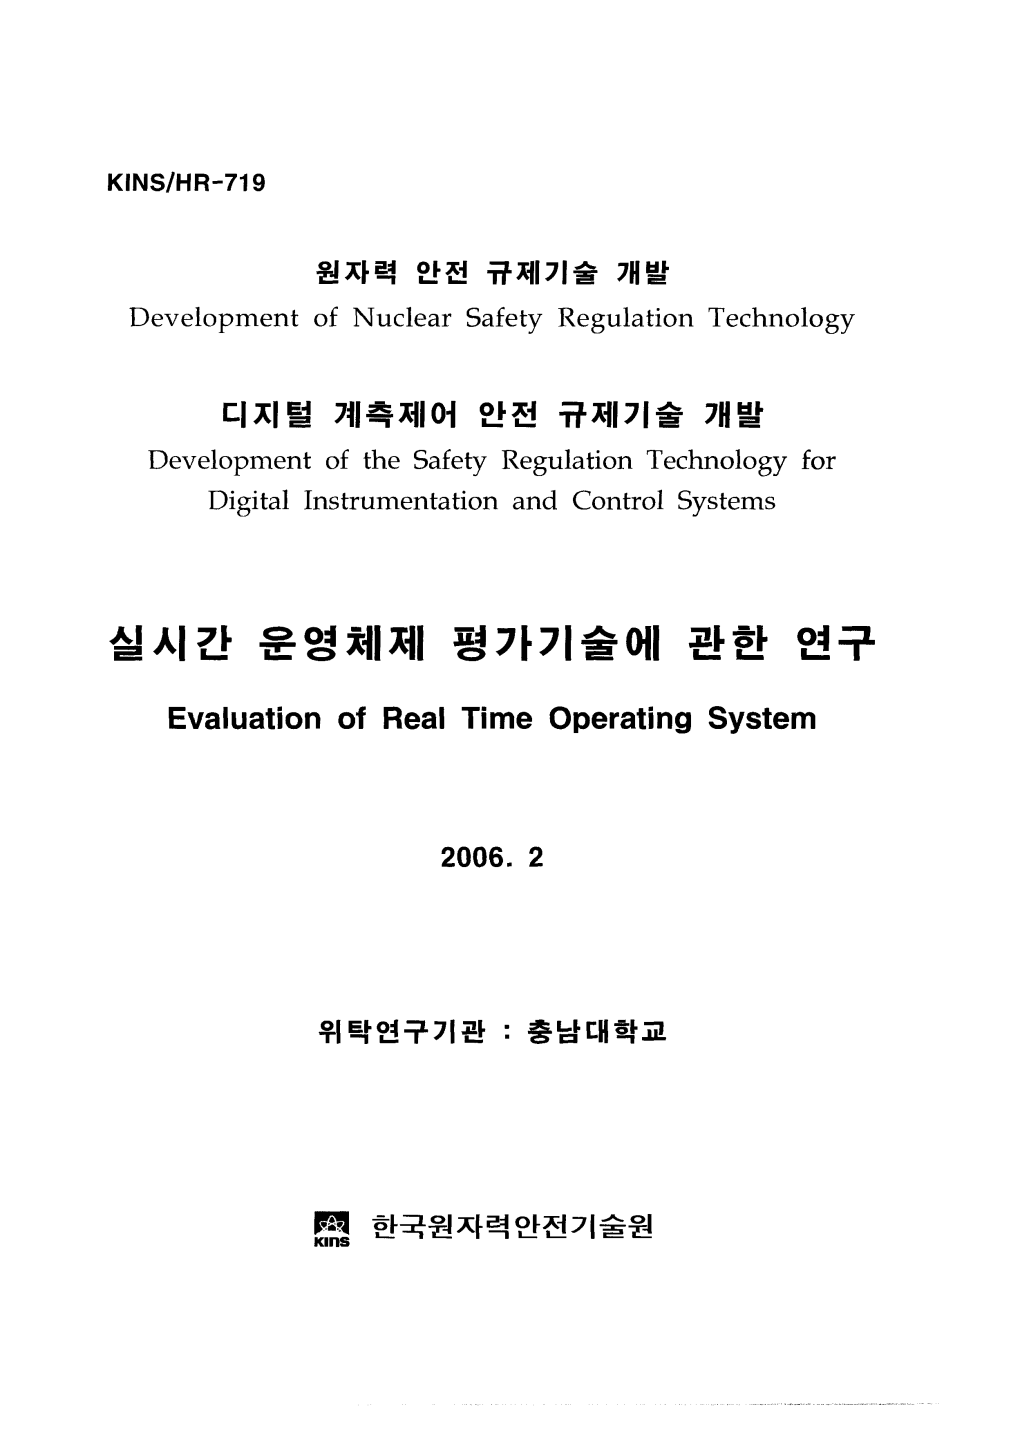 Evaluation of Real Time Operating System